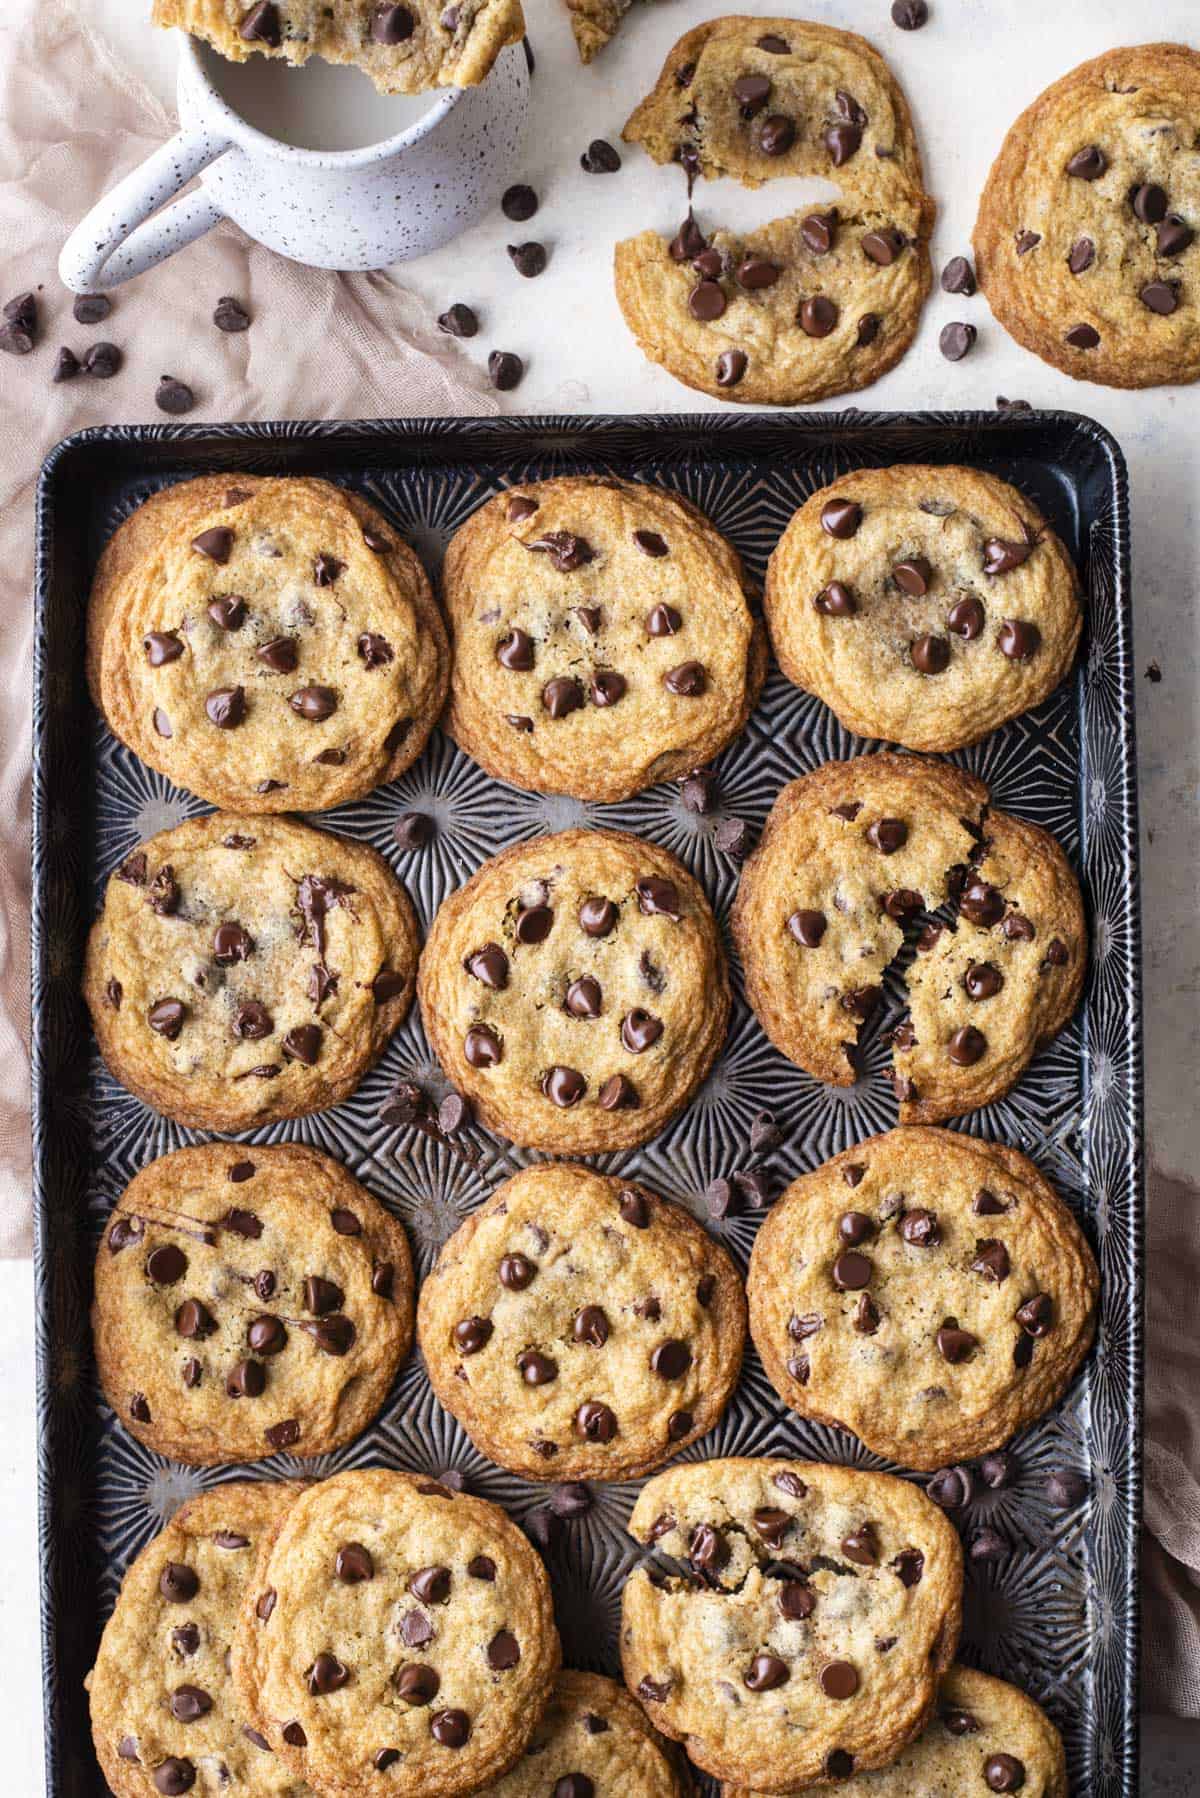 chocolate chip cookies in rows filling a dark metal sheet pan on top of a pink cloth, surrounded by chocolate chips sprinkled around, a whole cookie and a cookie that is partially pulled in half, and a piece of a cookie resting on top of a white mug of milk